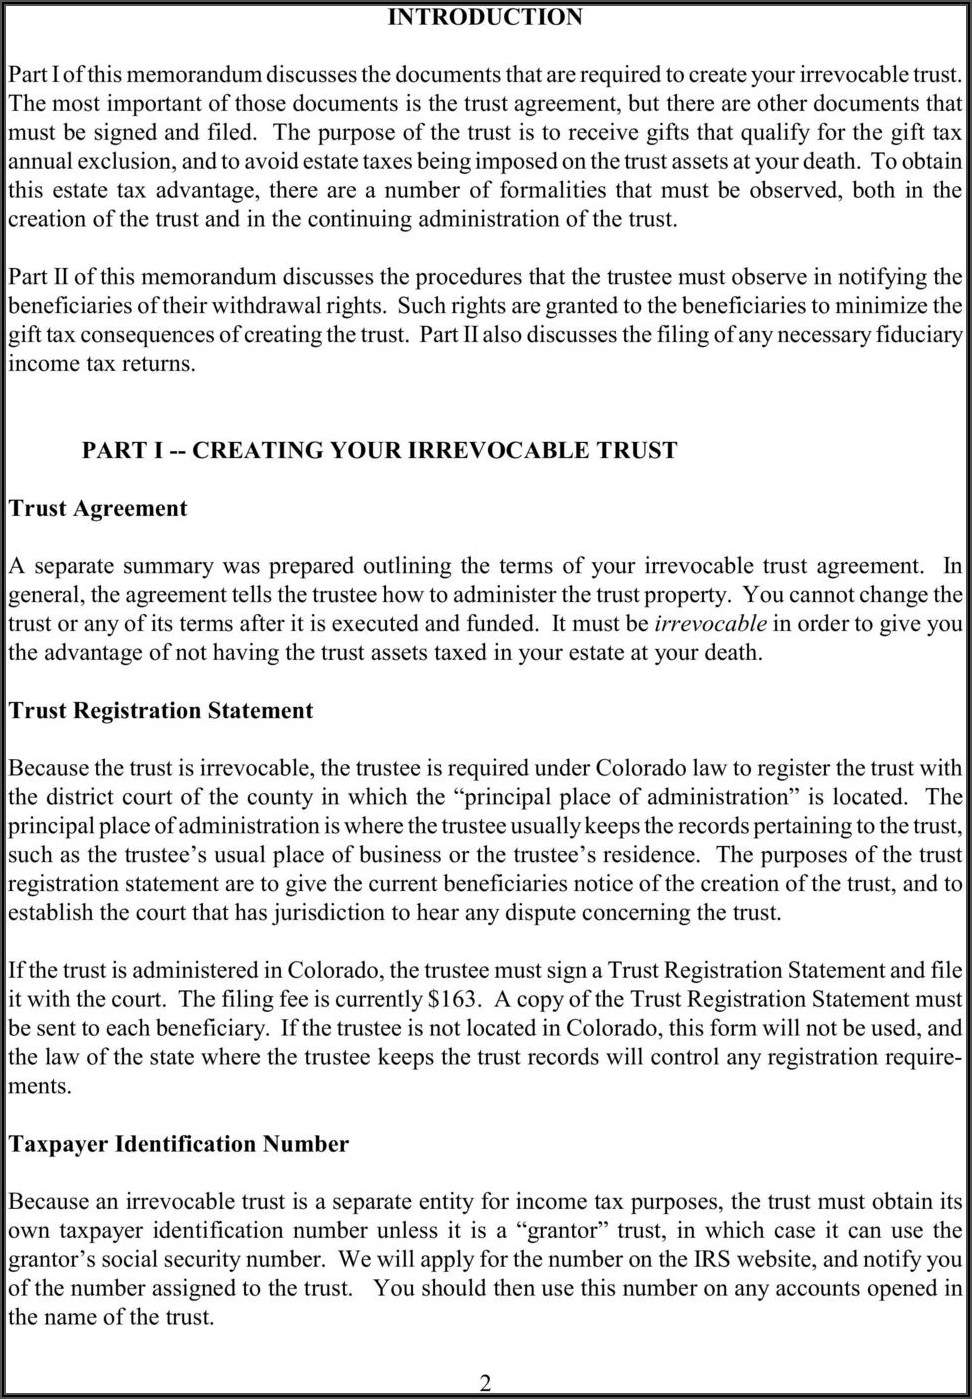 Florida Irrevocable Trust Execution Formalities